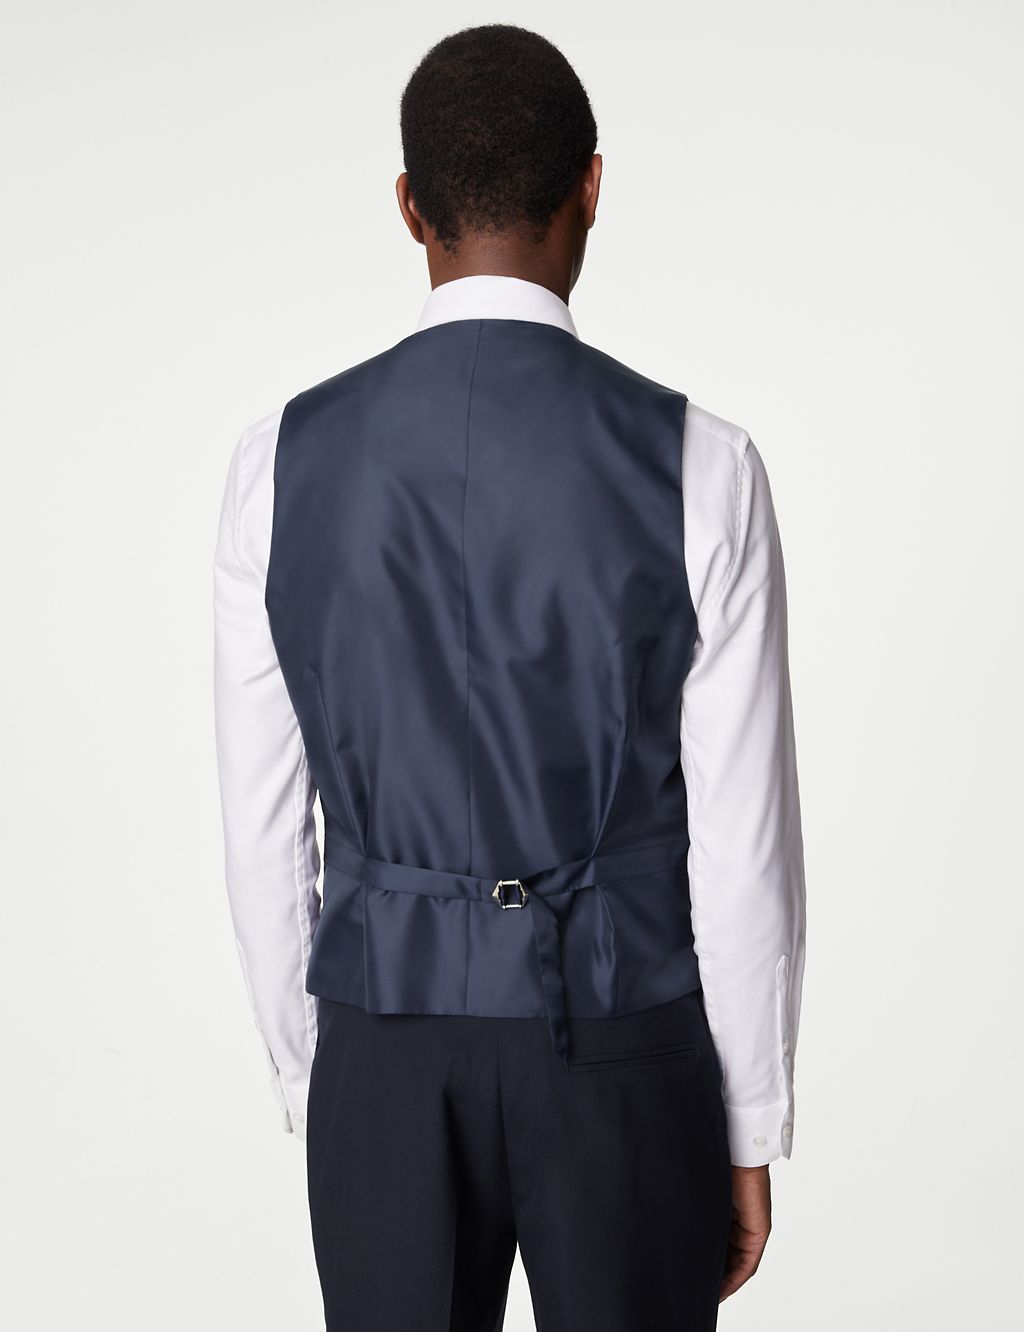 Tailored Fit Waistcoat 4 of 8